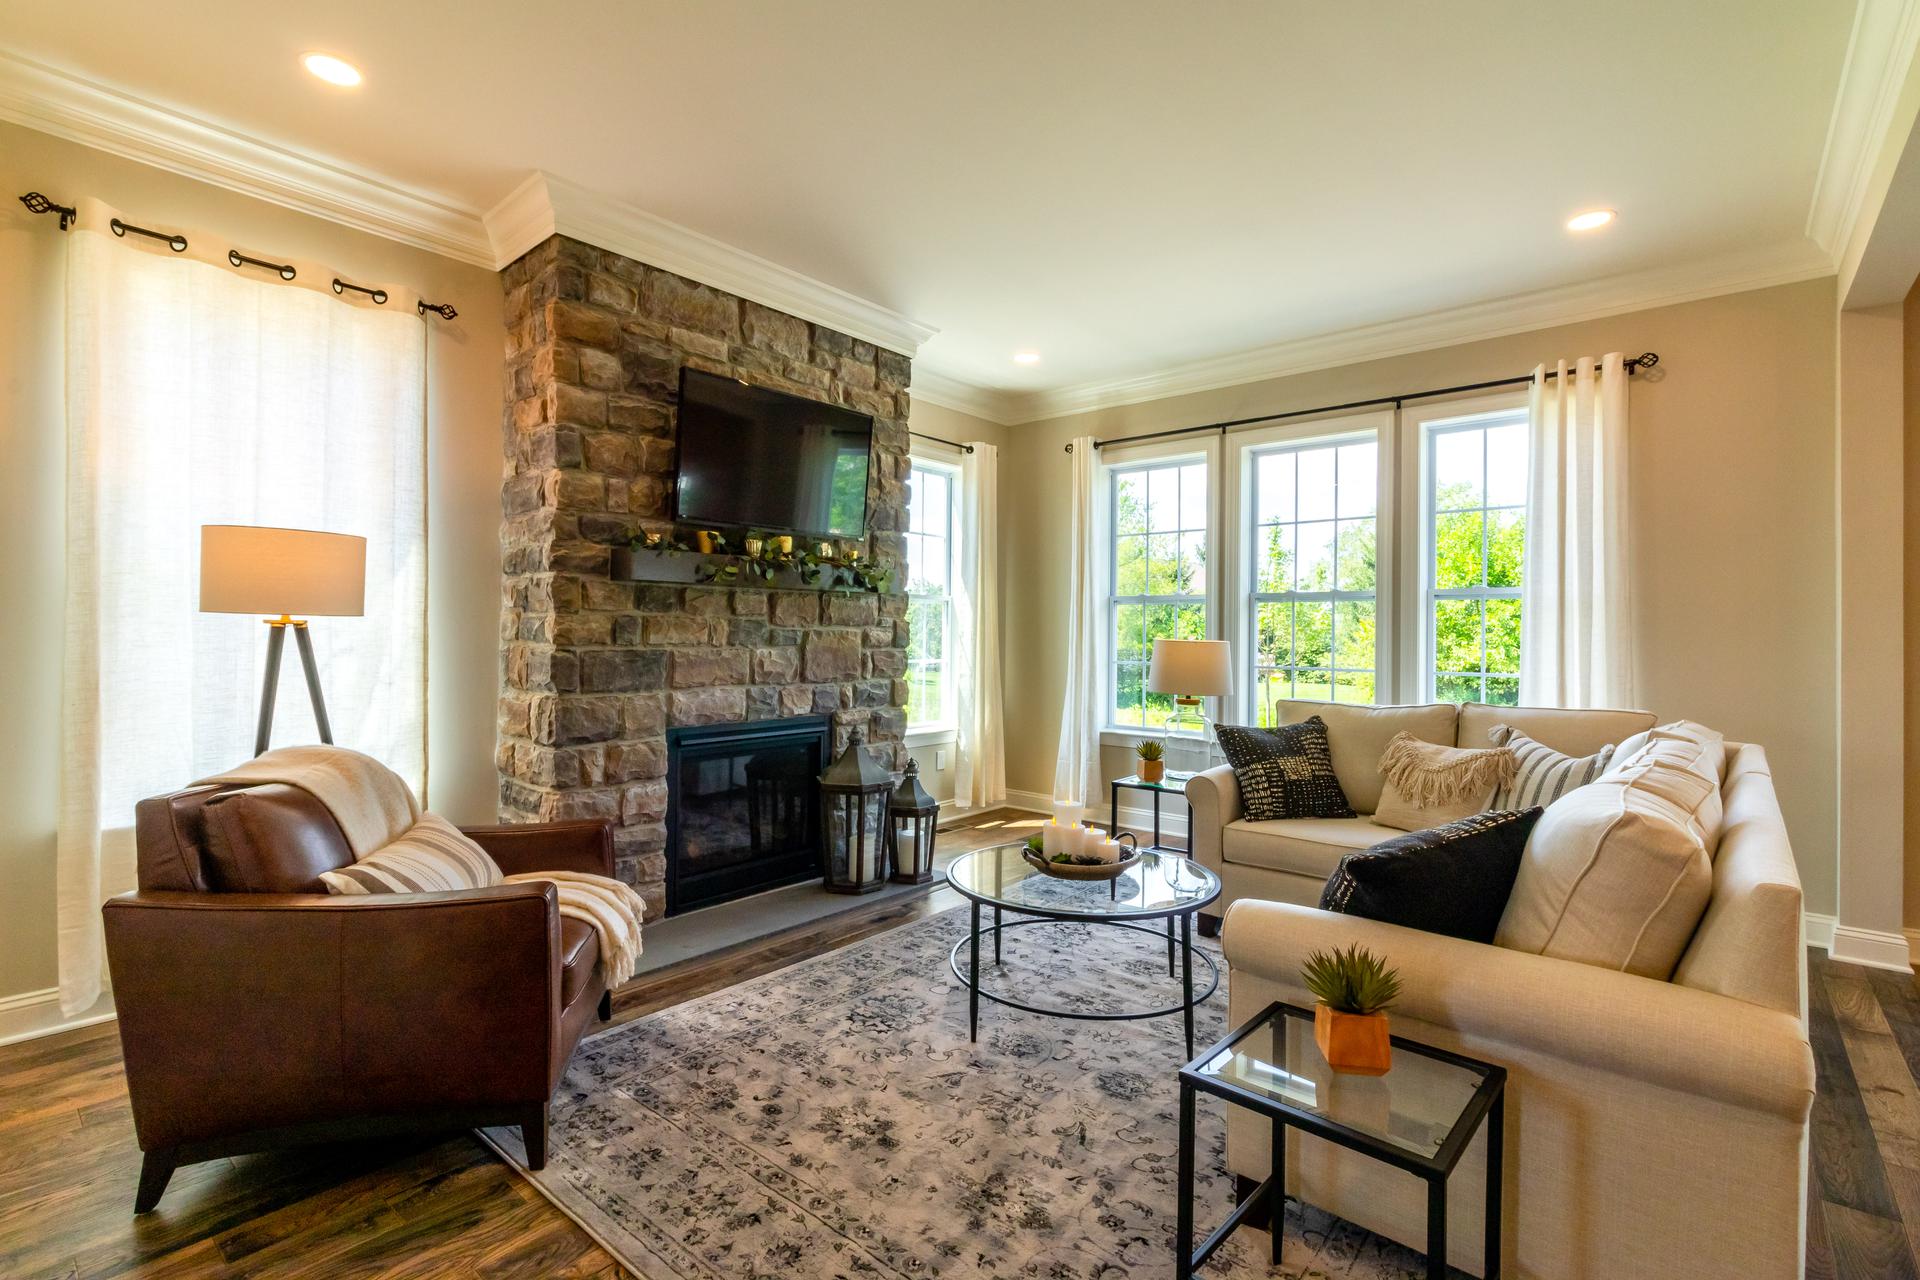 10 Staging Tips to Make Your House Shine